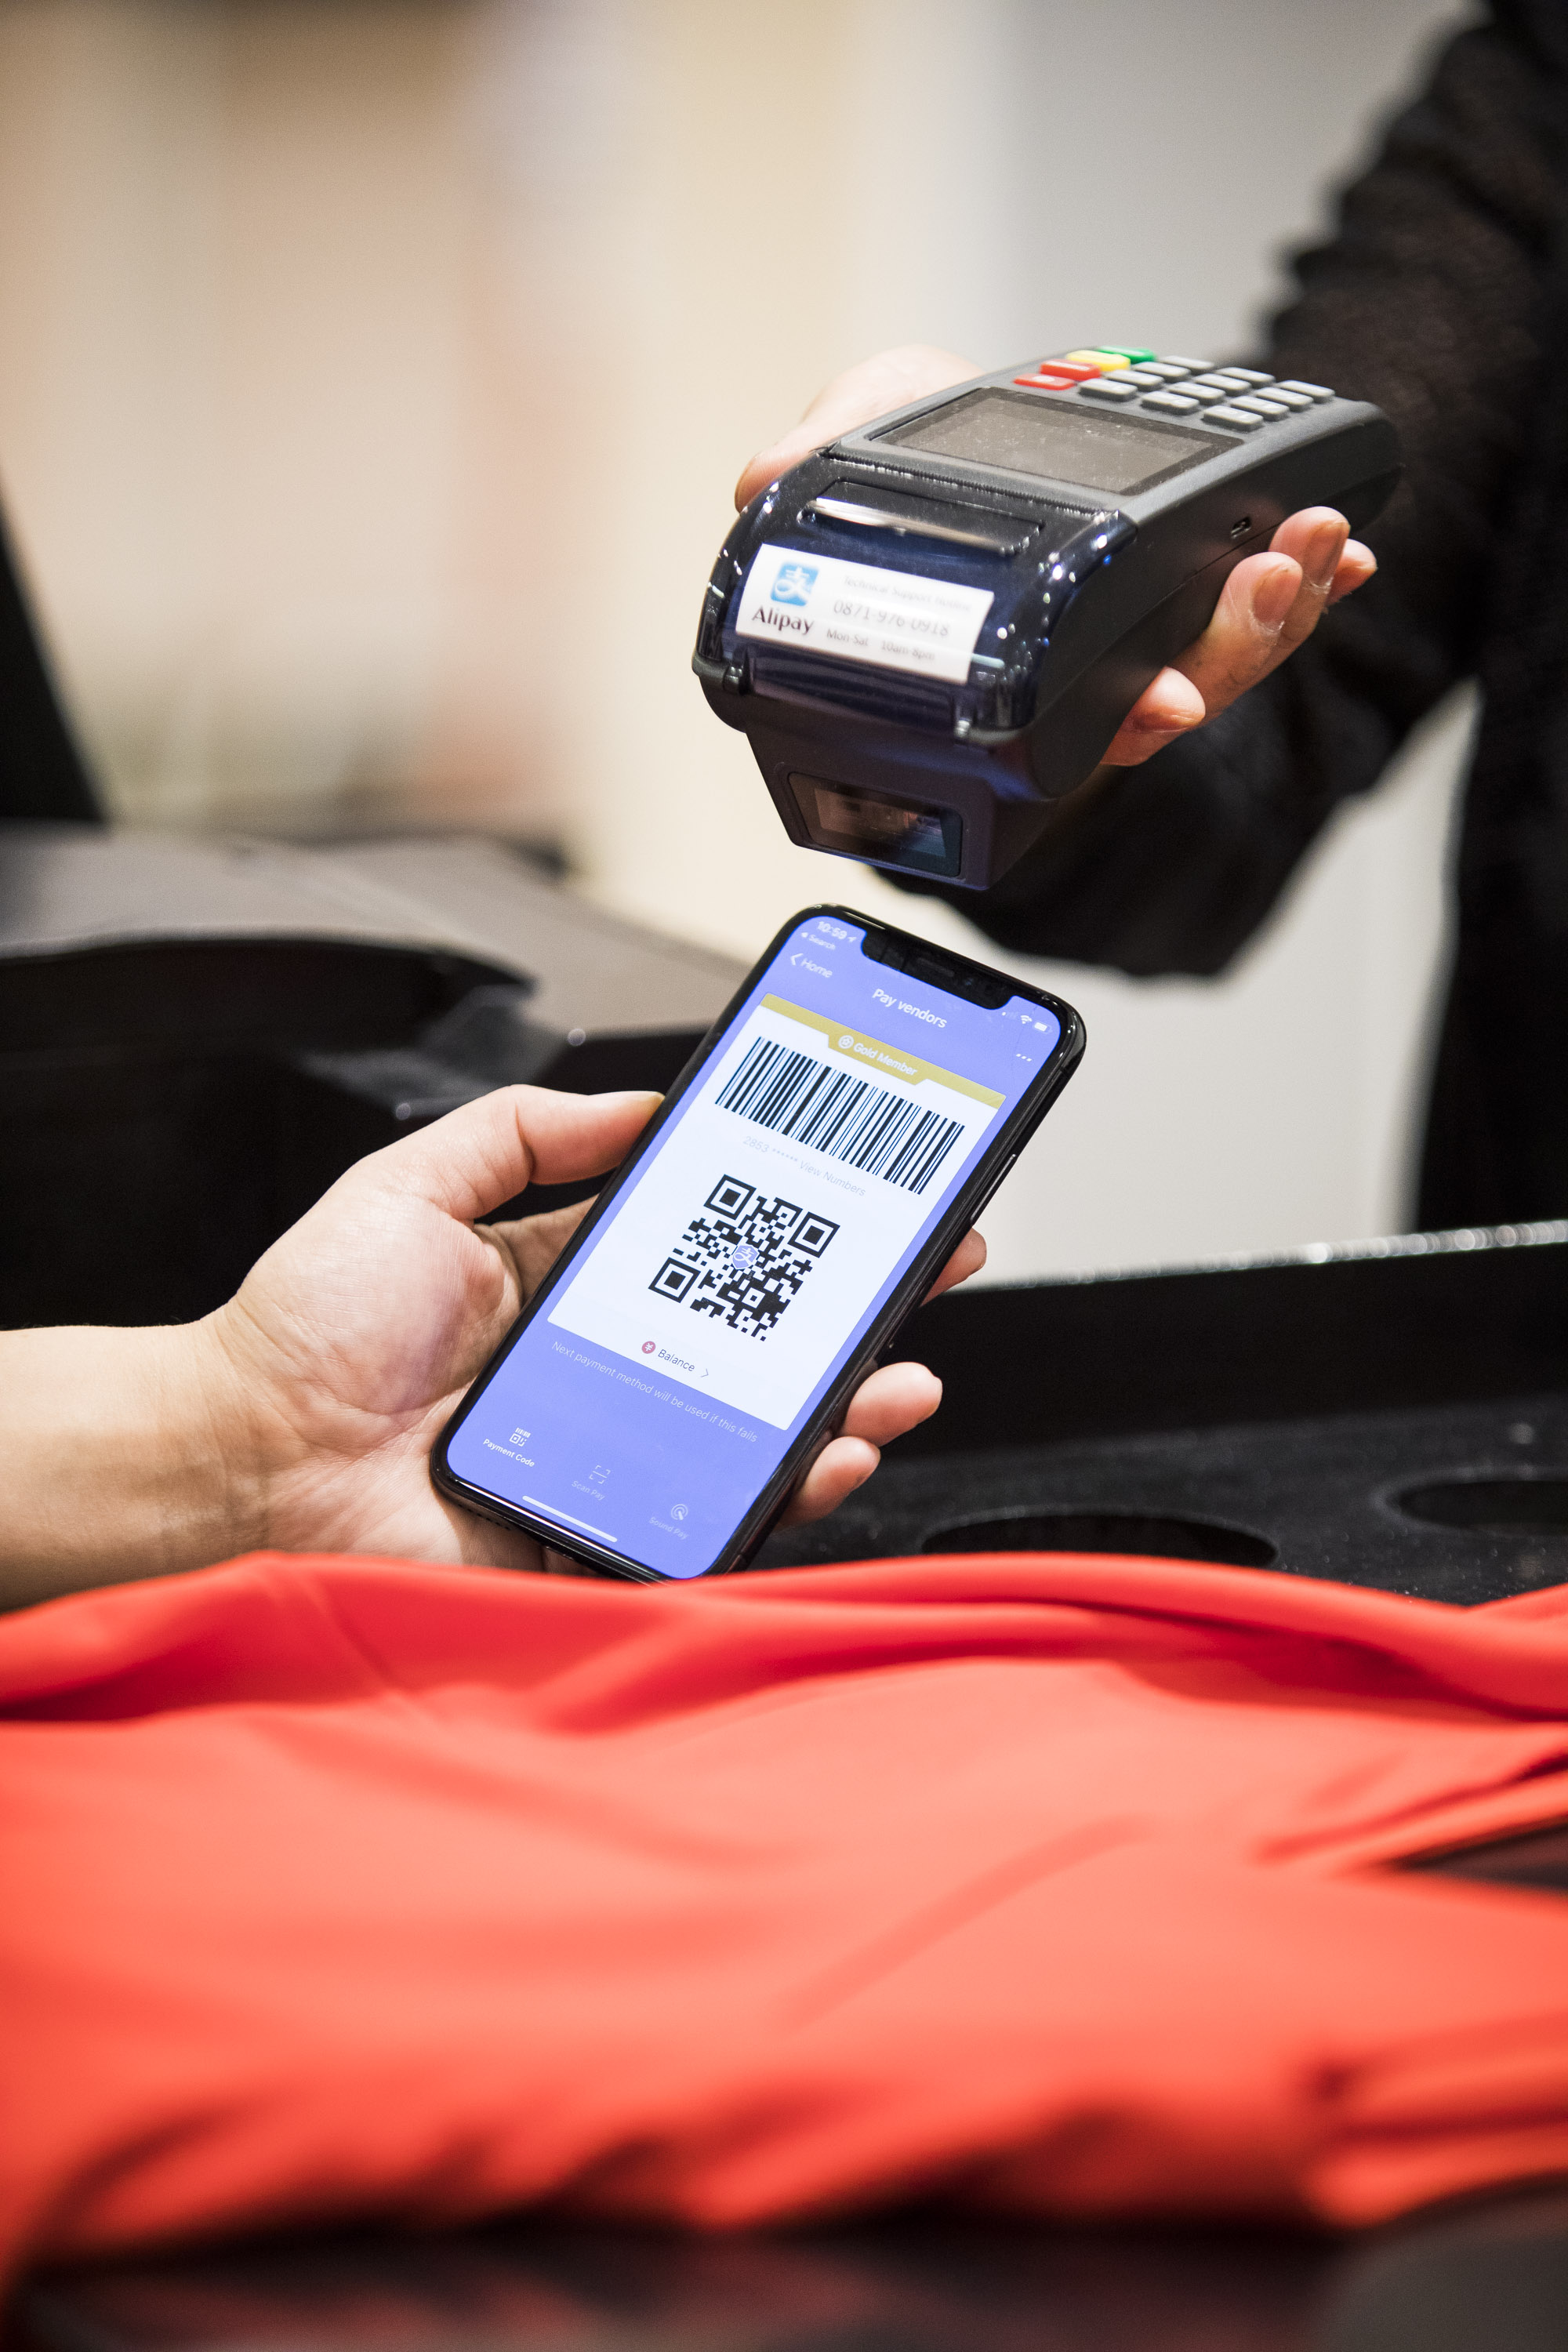 China’s mobile payments hit USD 8.4 trillion, NFC payments see 50% increase